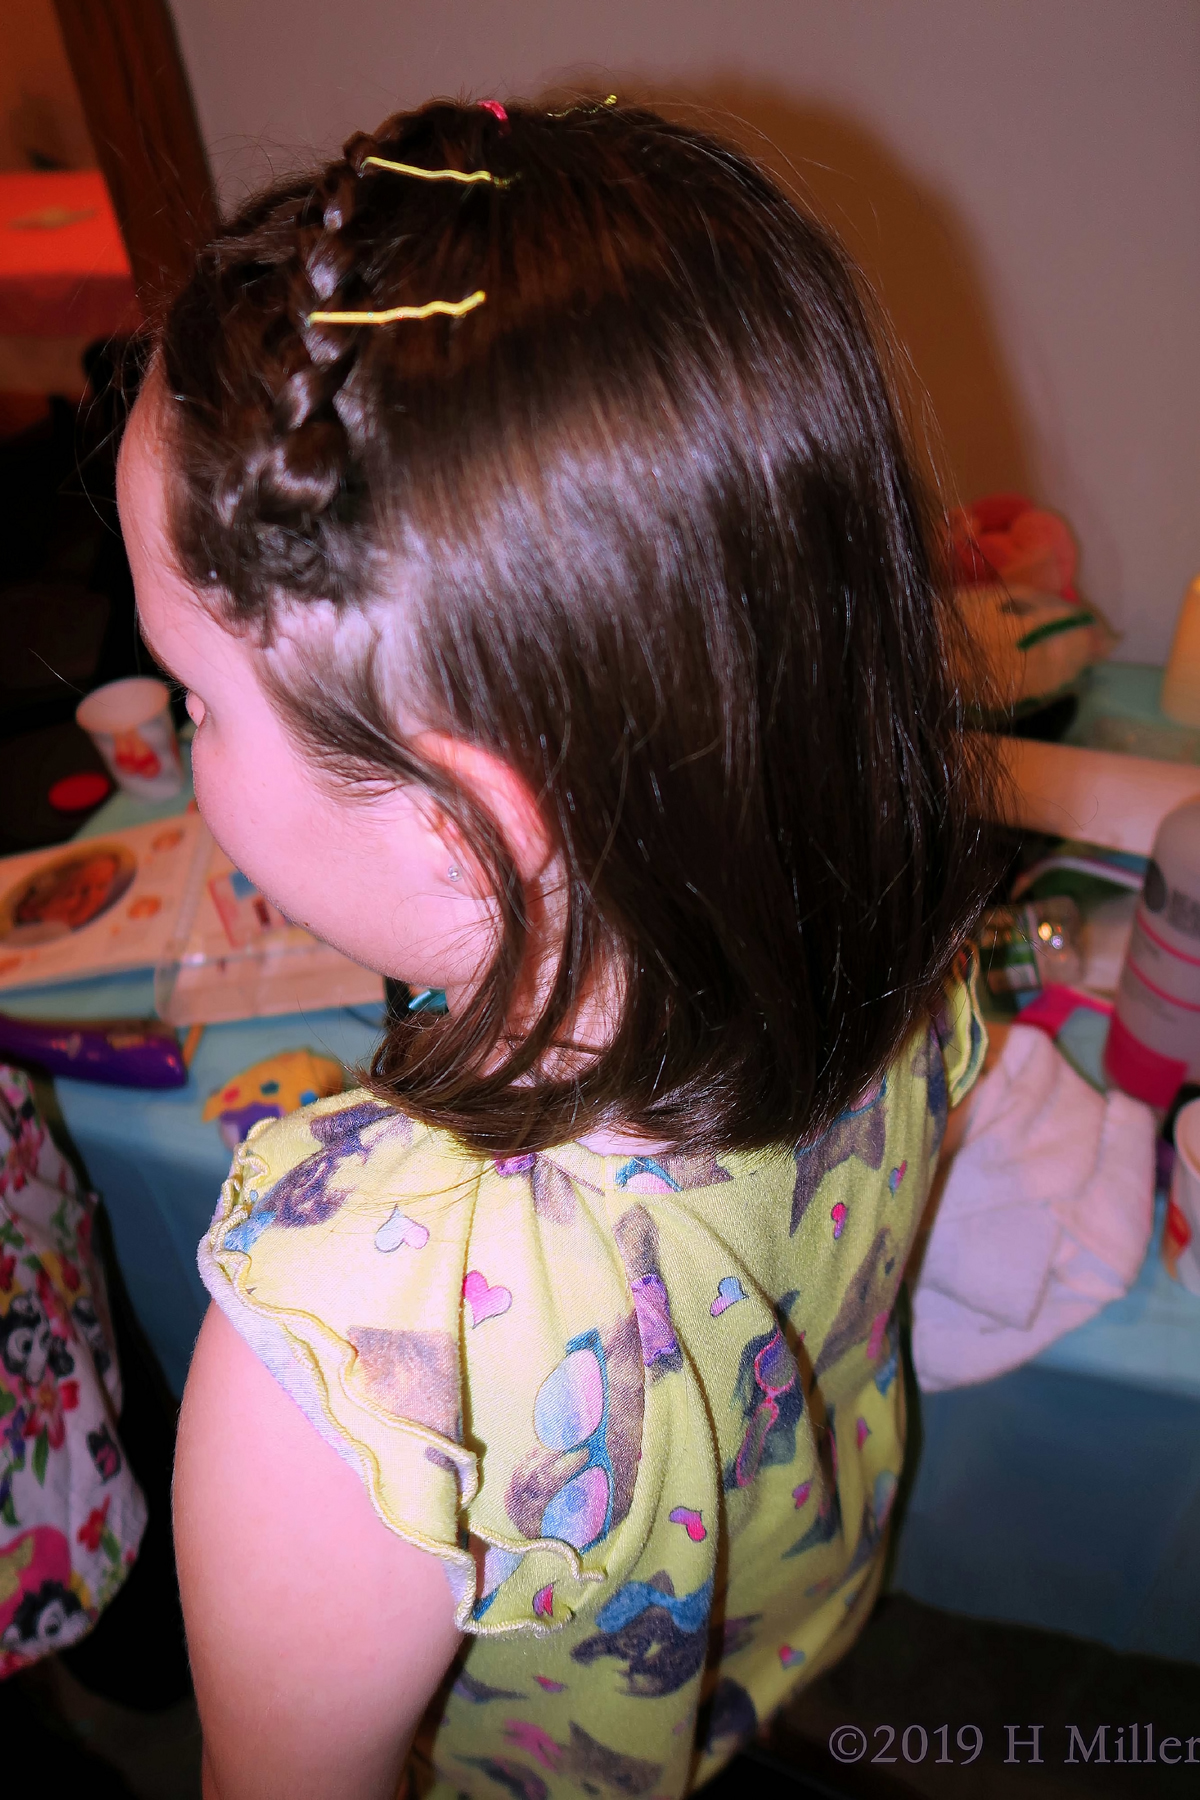 Braided With Barrettes! Kids Hairstyle On Spa Party Guest! 1